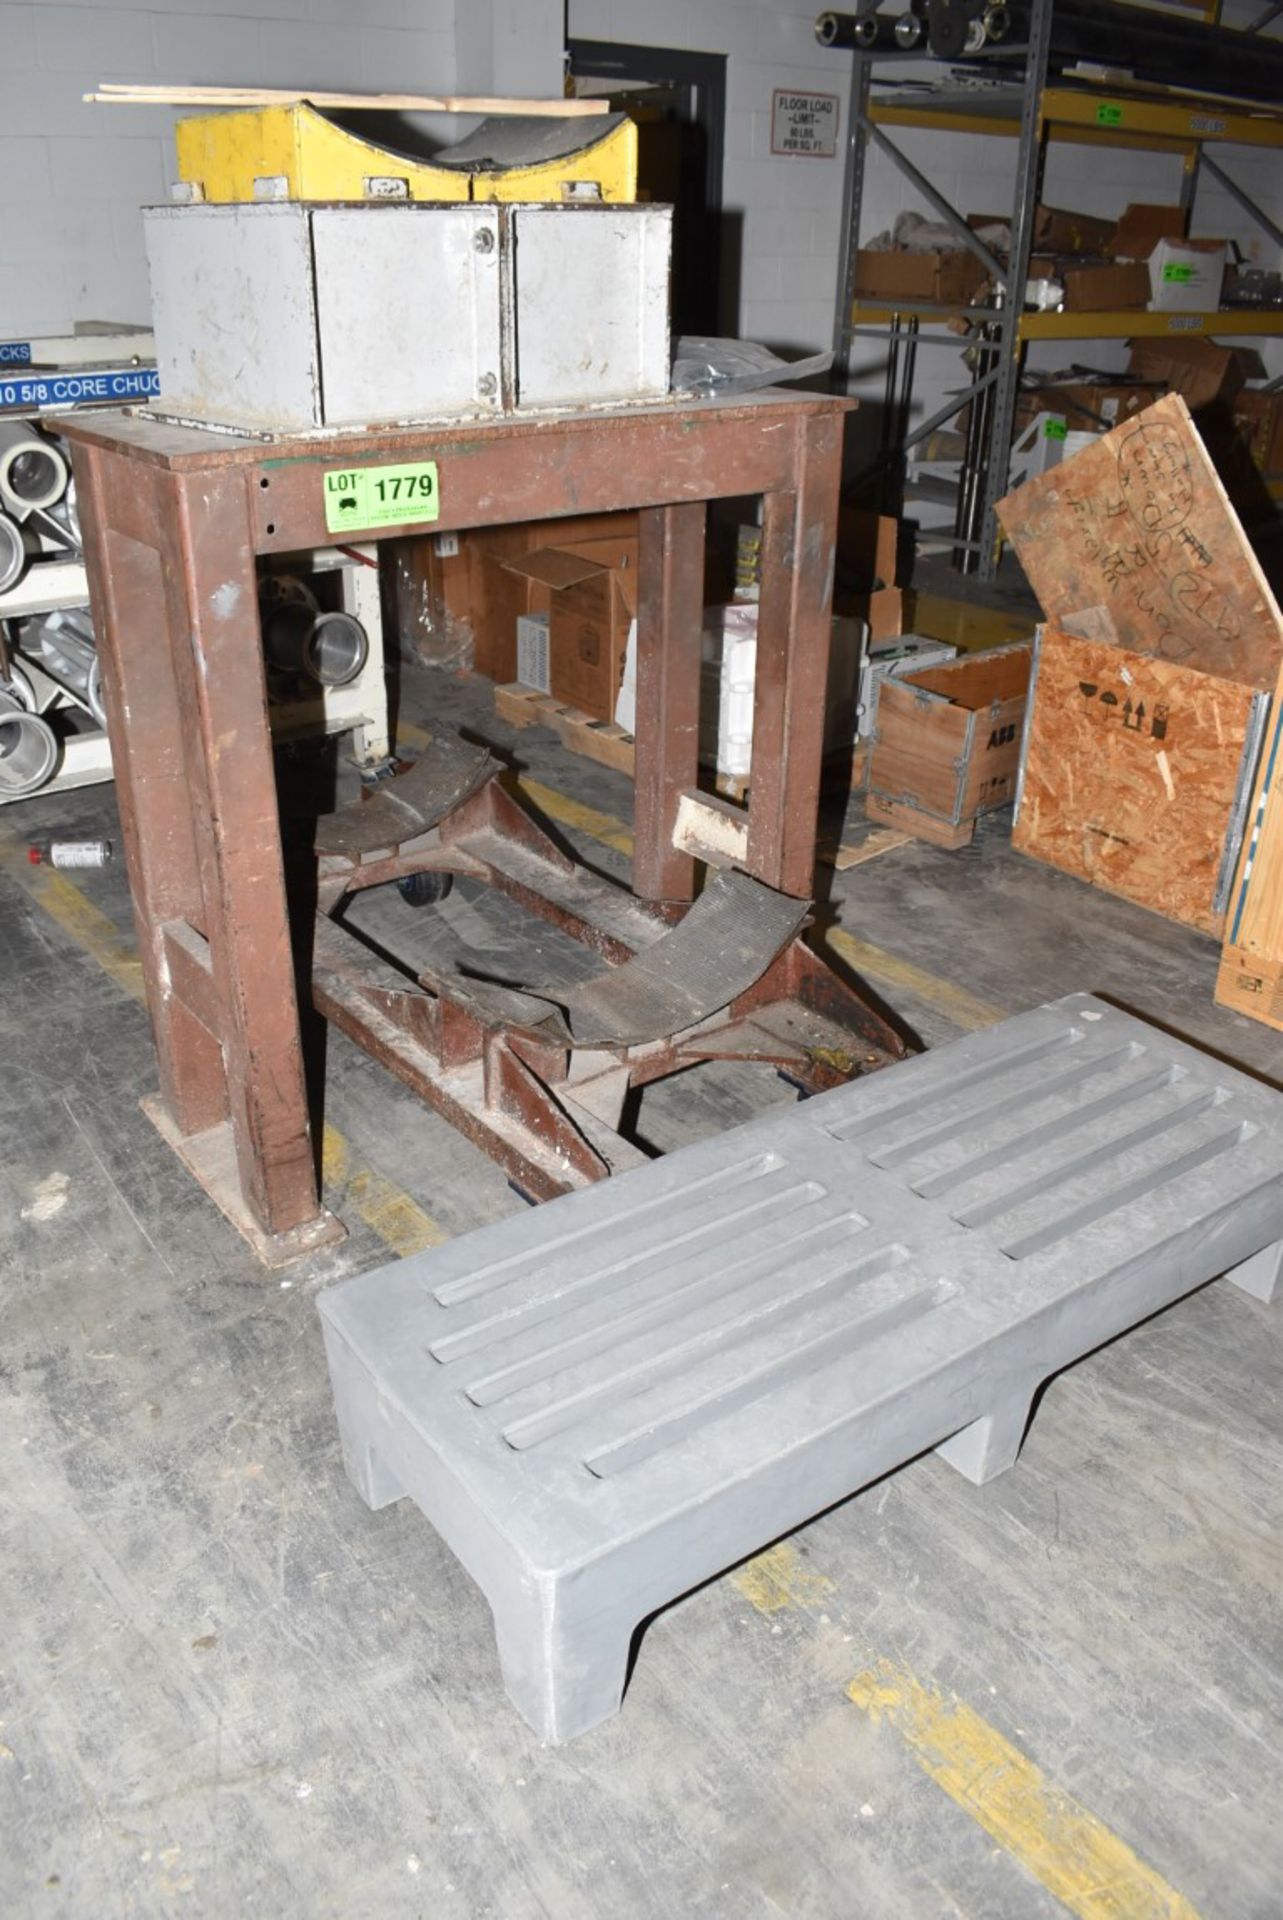 LOT/ ROLL CARTS & STEEL STAND [RIGGING FEE FOR LOT #1779 - $25 USD PLUS APPLICABLE TAXES] - Image 2 of 2